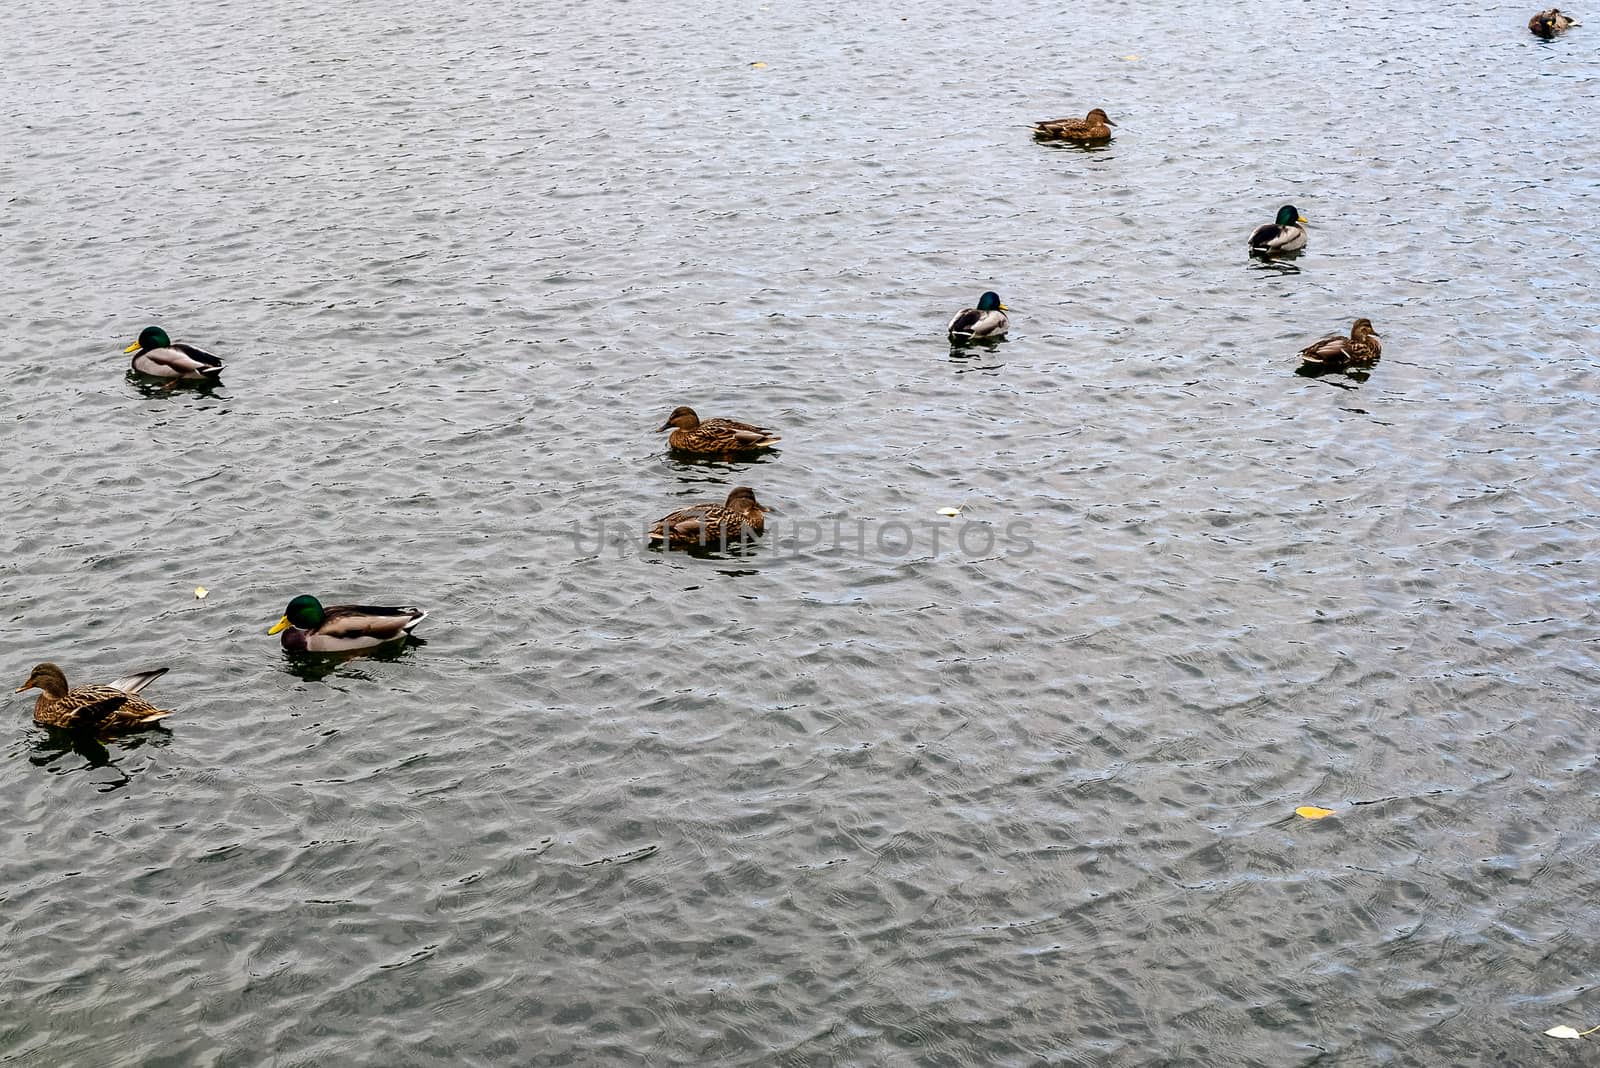 ducks-females and drakes - on the water of the lake in the autumn Park by alexandr_sorokin